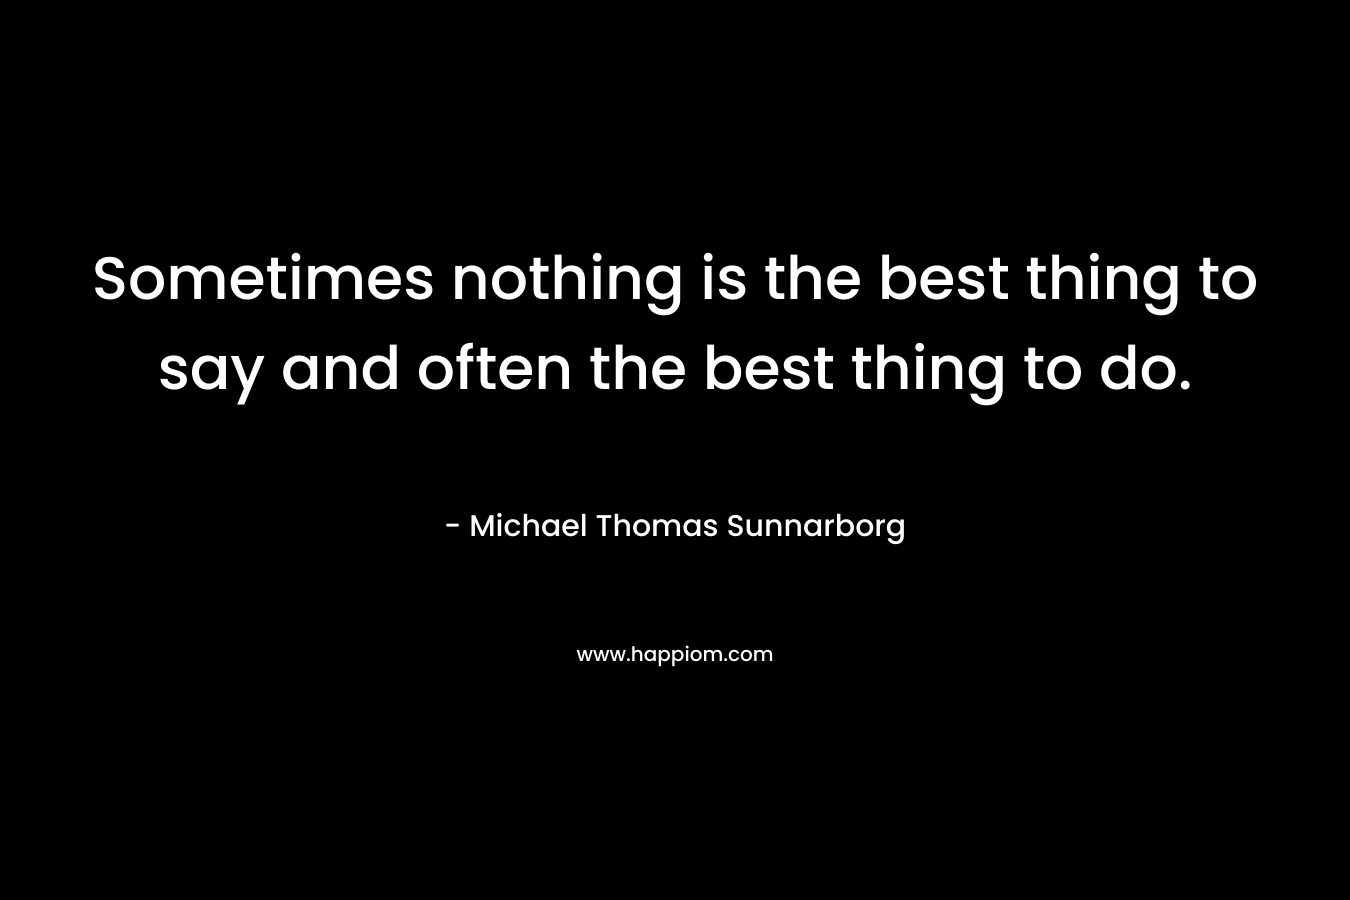 Sometimes nothing is the best thing to say and often the best thing to do.